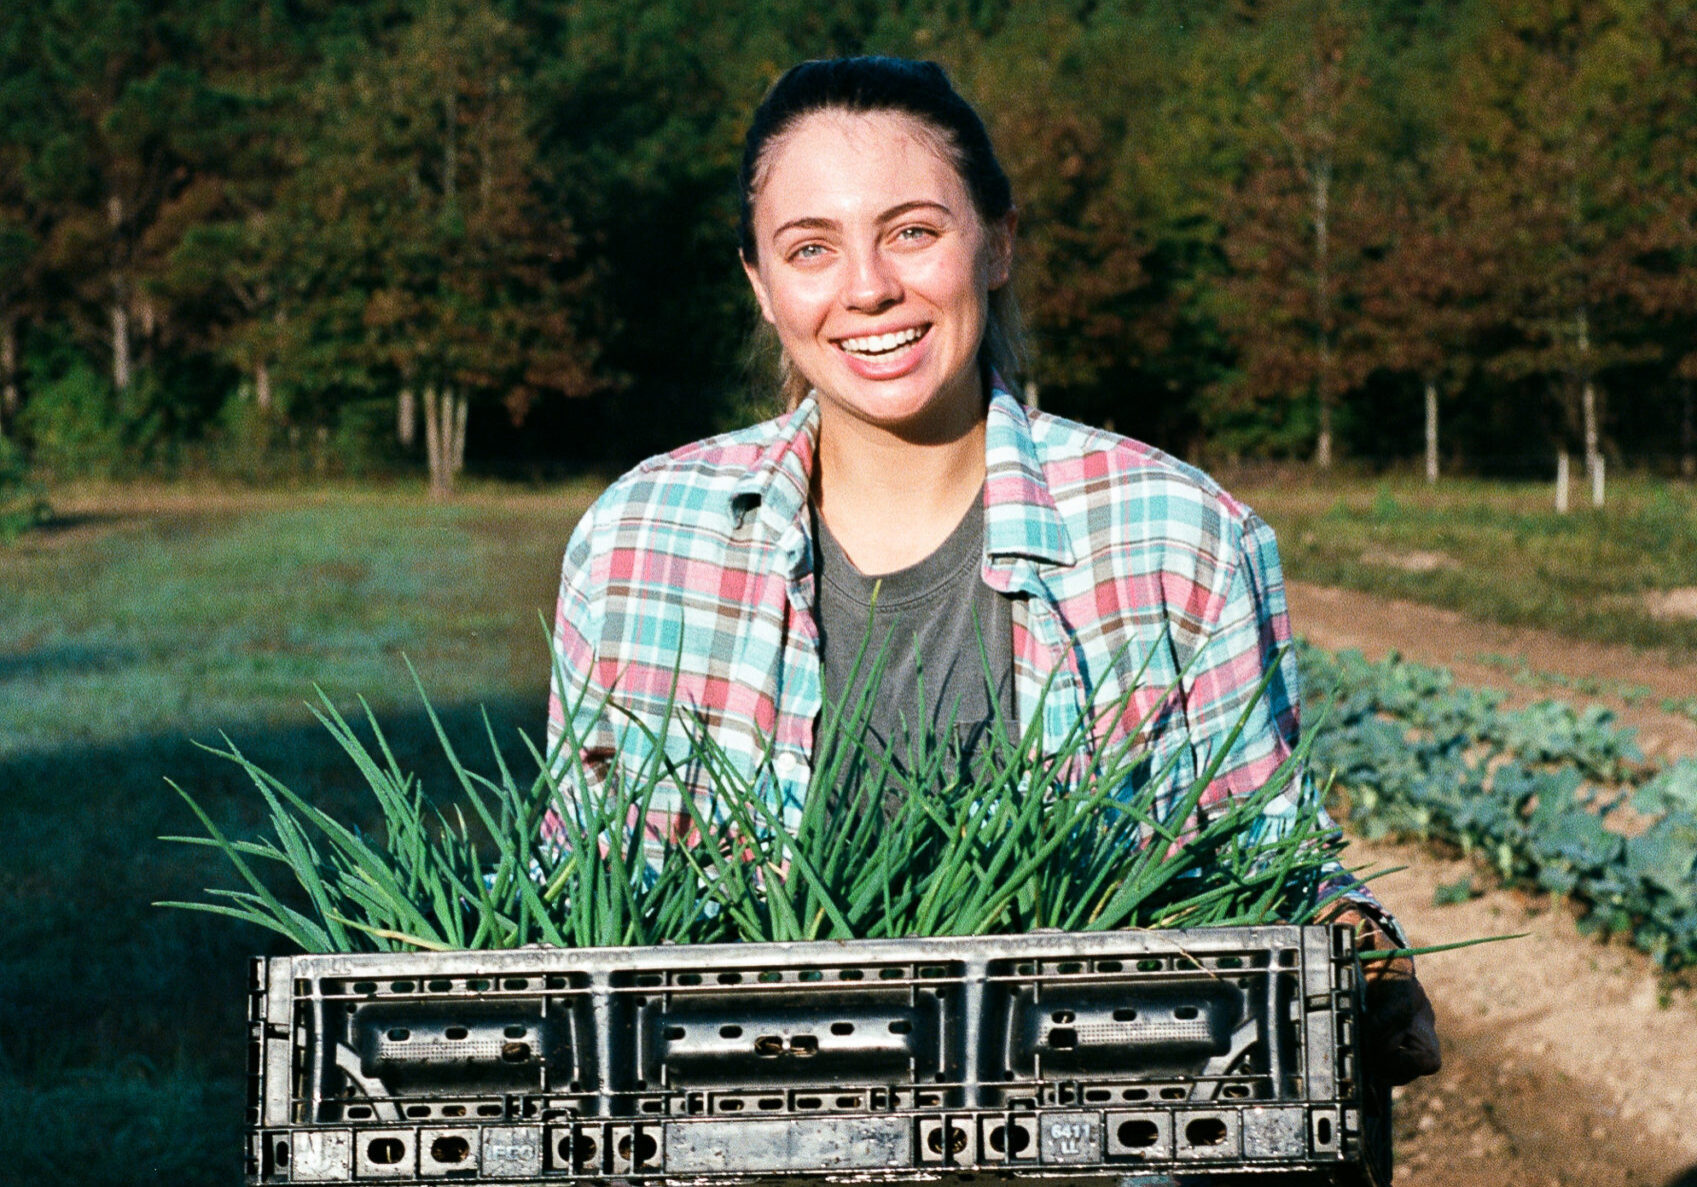 Neely standing in the fields with a large crate of spring onions.